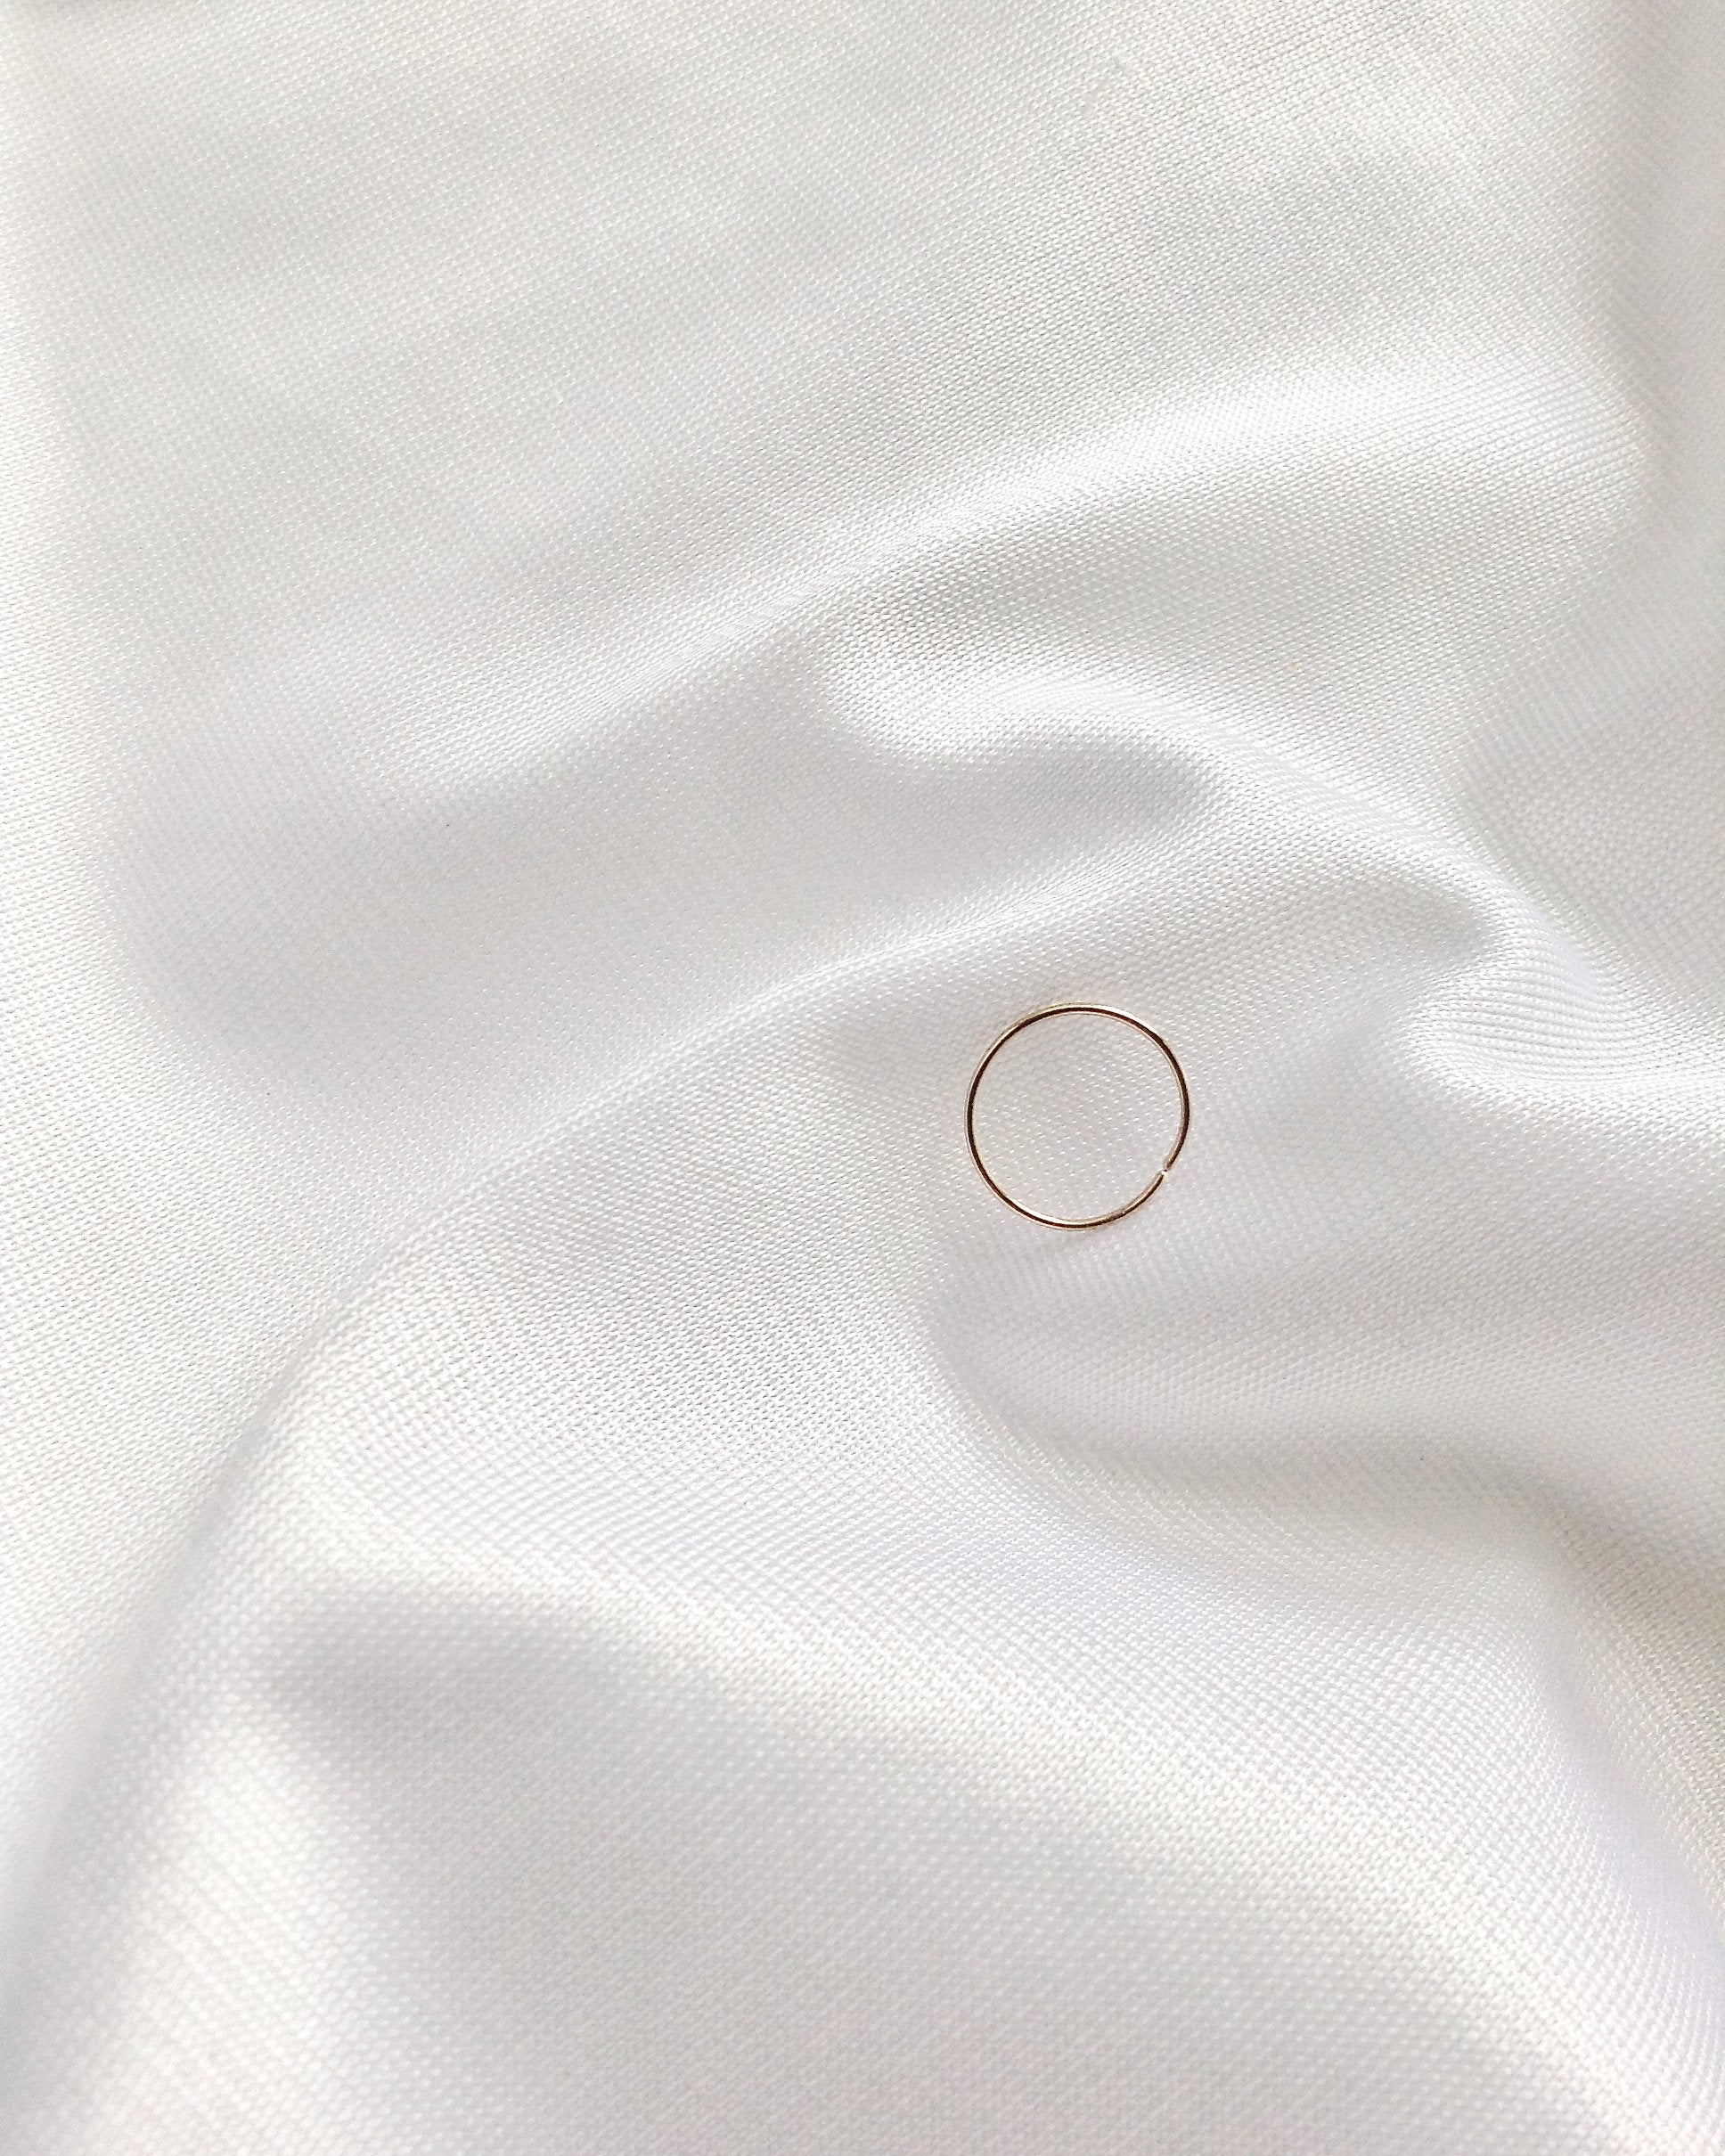 Buy Nose Ring, Small Gold Nose Ring, Tribal Nose Piercing, Indian Jewelry, Nose  Hoop, Helix Hoop, Cartilage Earring, Tragus Earring, Opal Hoop Online in  India - Etsy